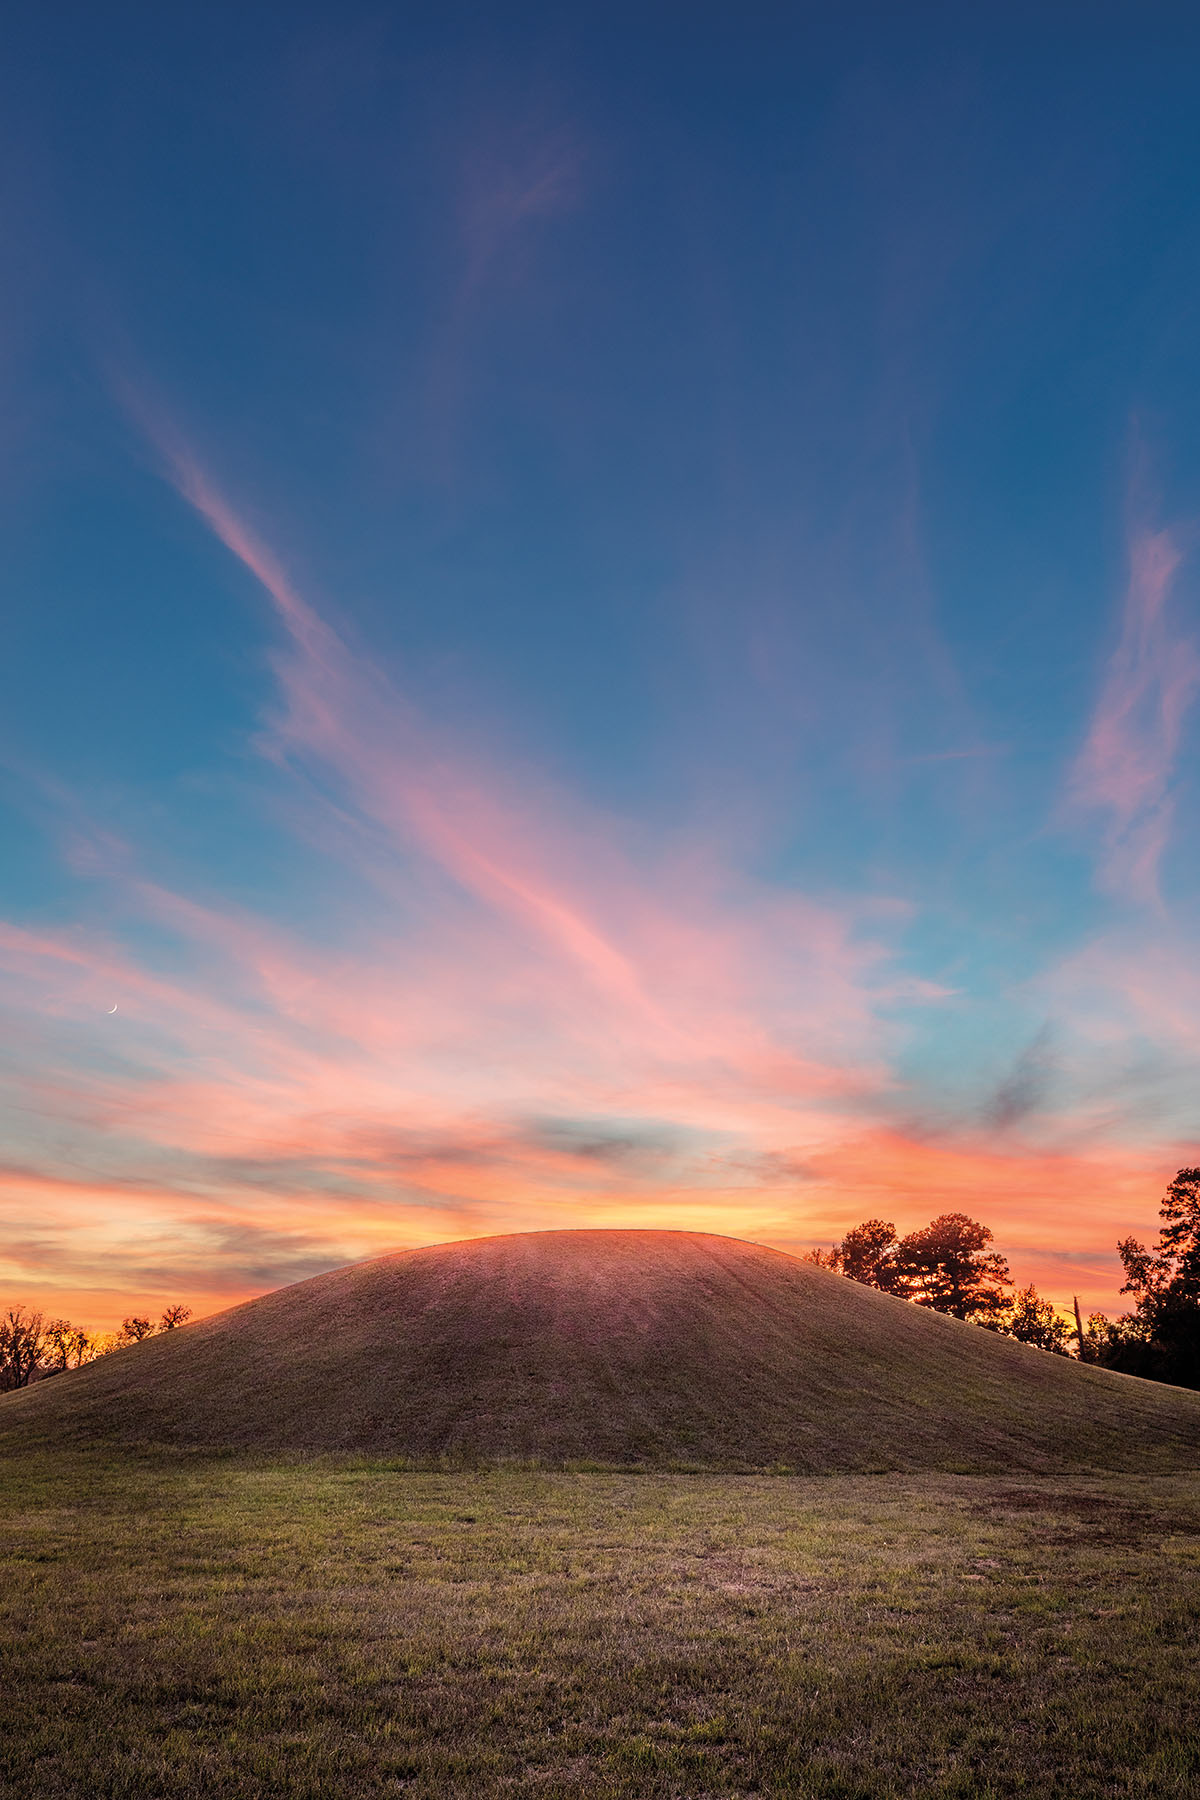 A mound of earth topped with green and brown grass in a pink and blue sunset with a few whispy clouds